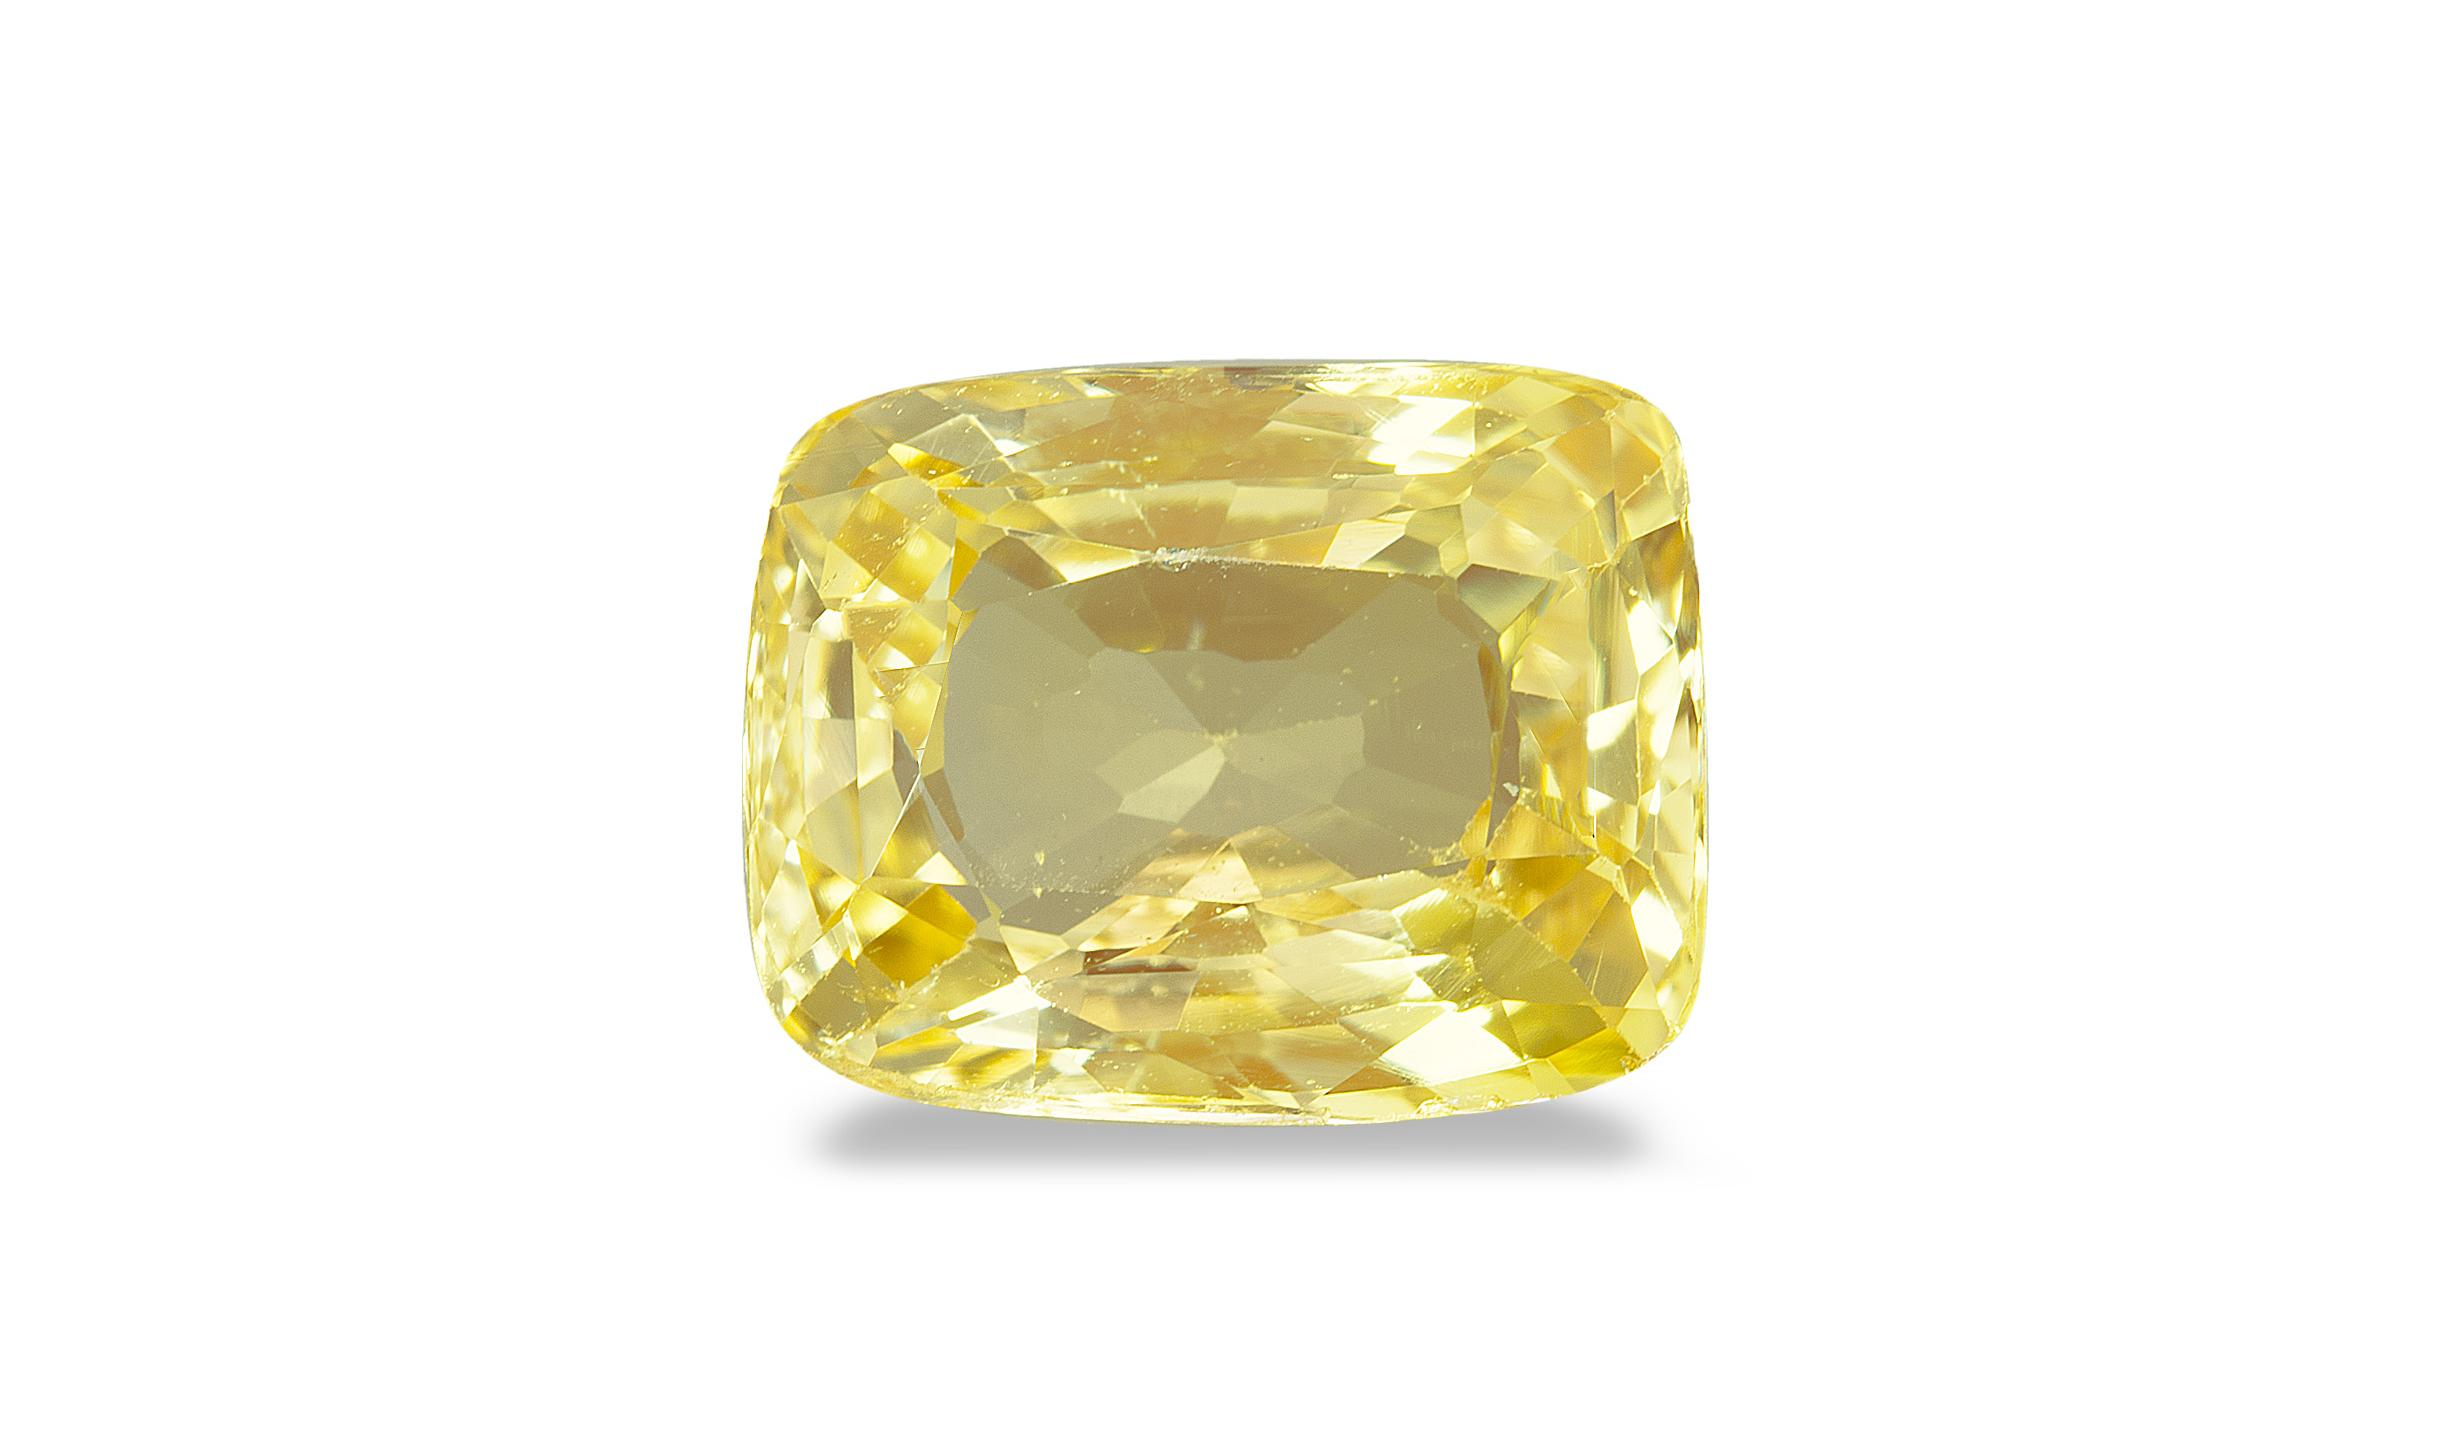 Figure 1. The 4+-carat yellow stone that is the subject of this report. Photo: Maitree Petchloun